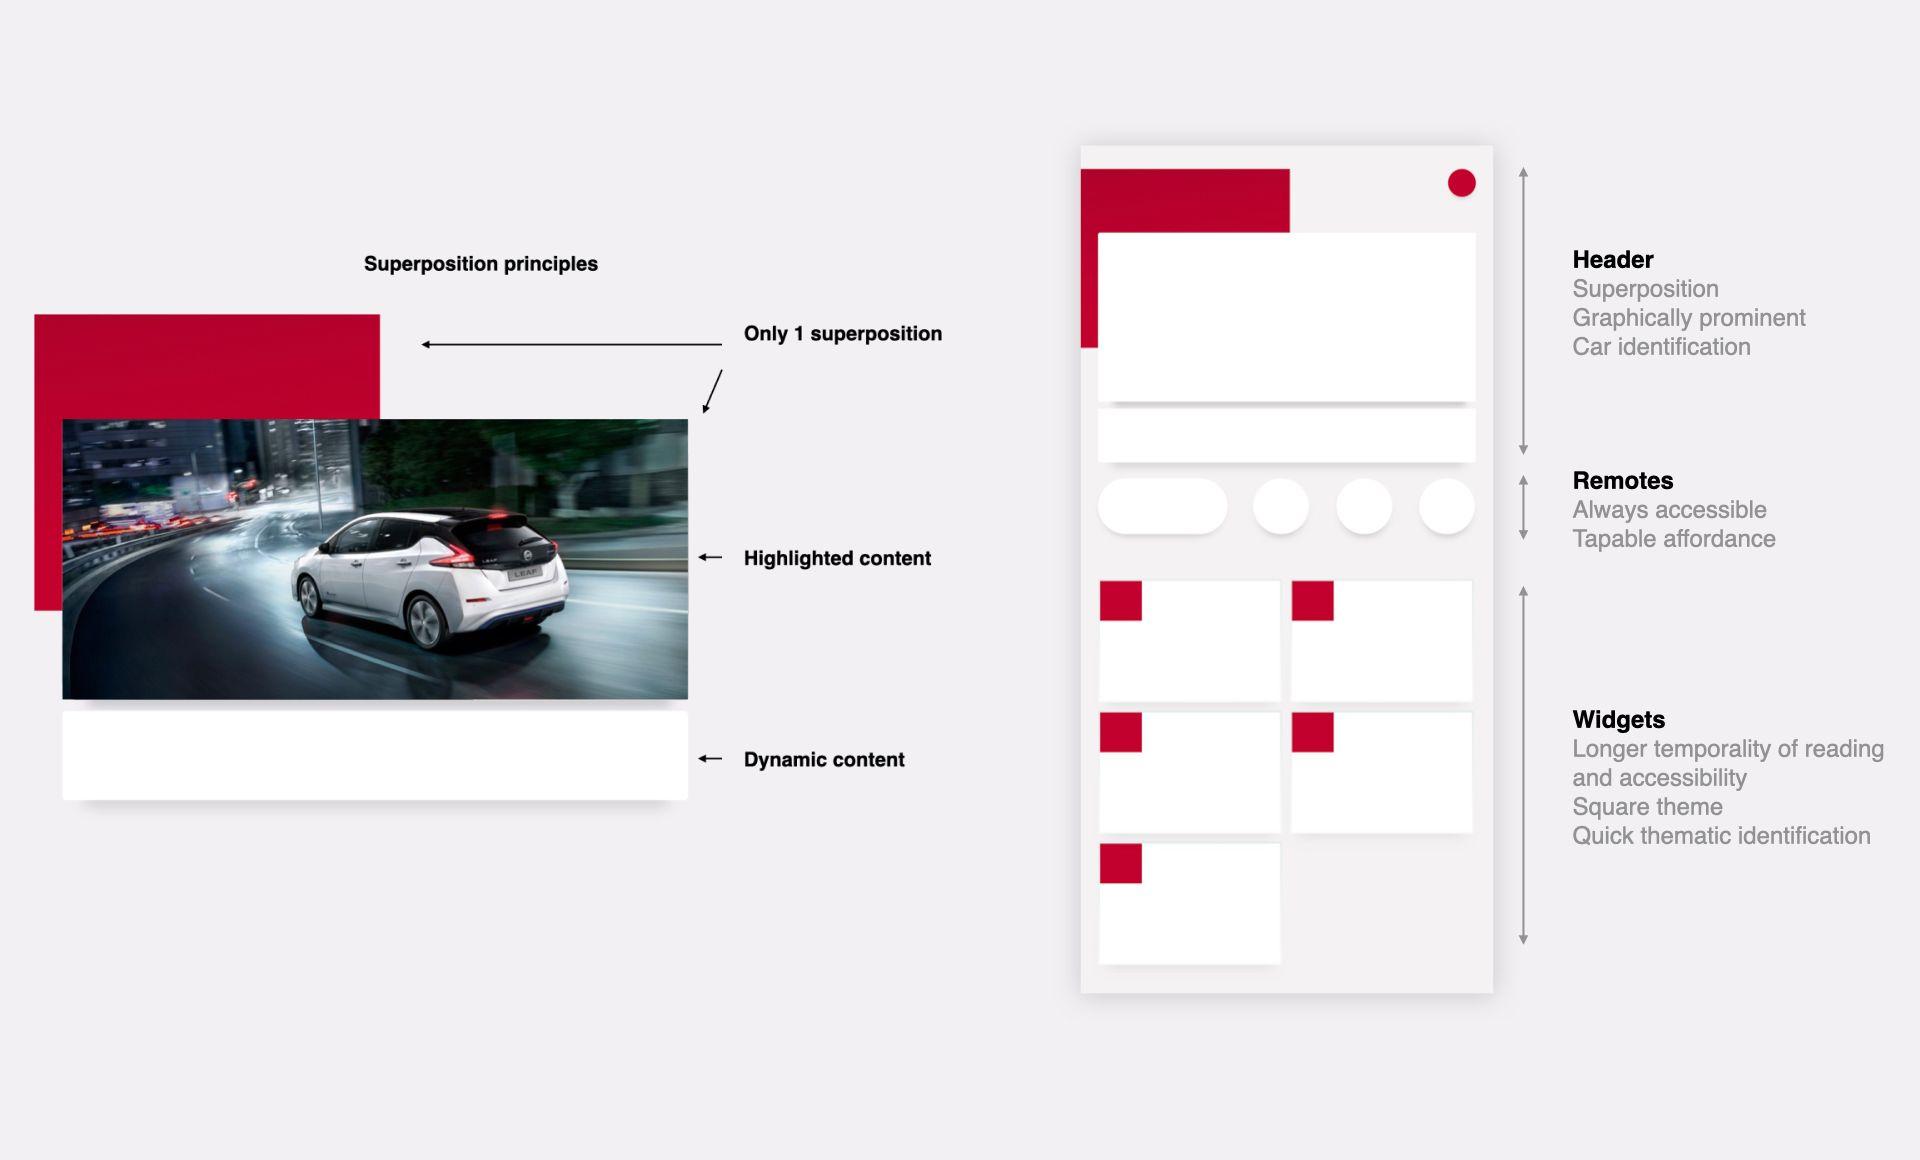 Image of behaviour for the Nissan app